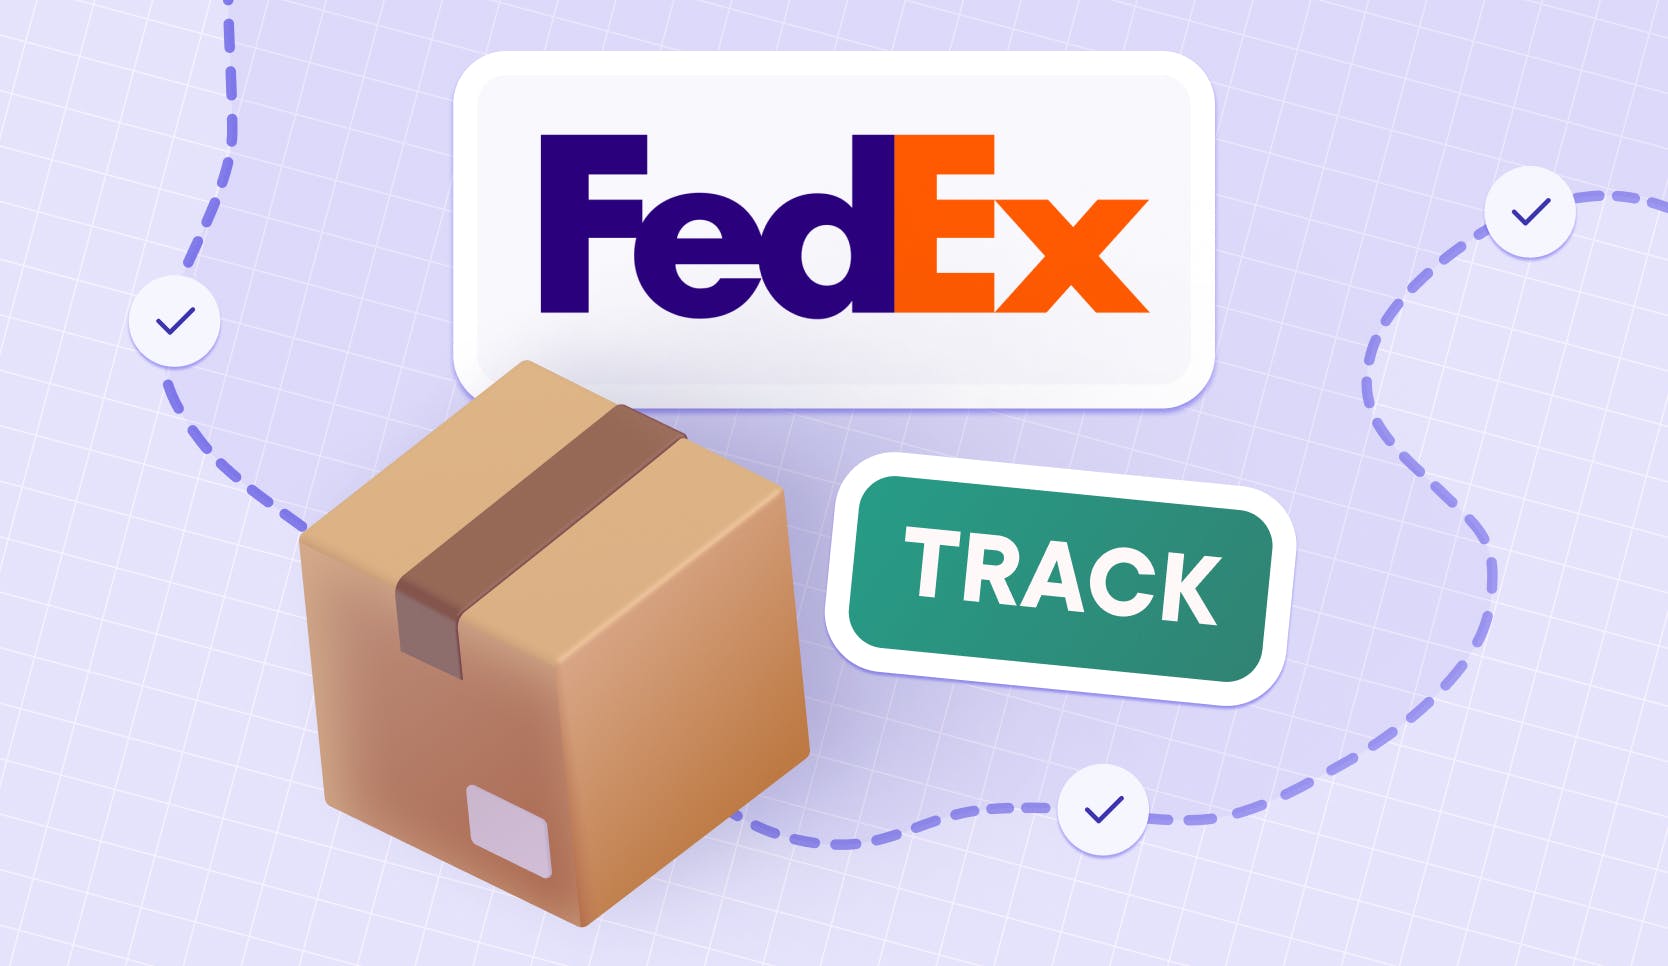 How To Track A Fedex Package In Depth